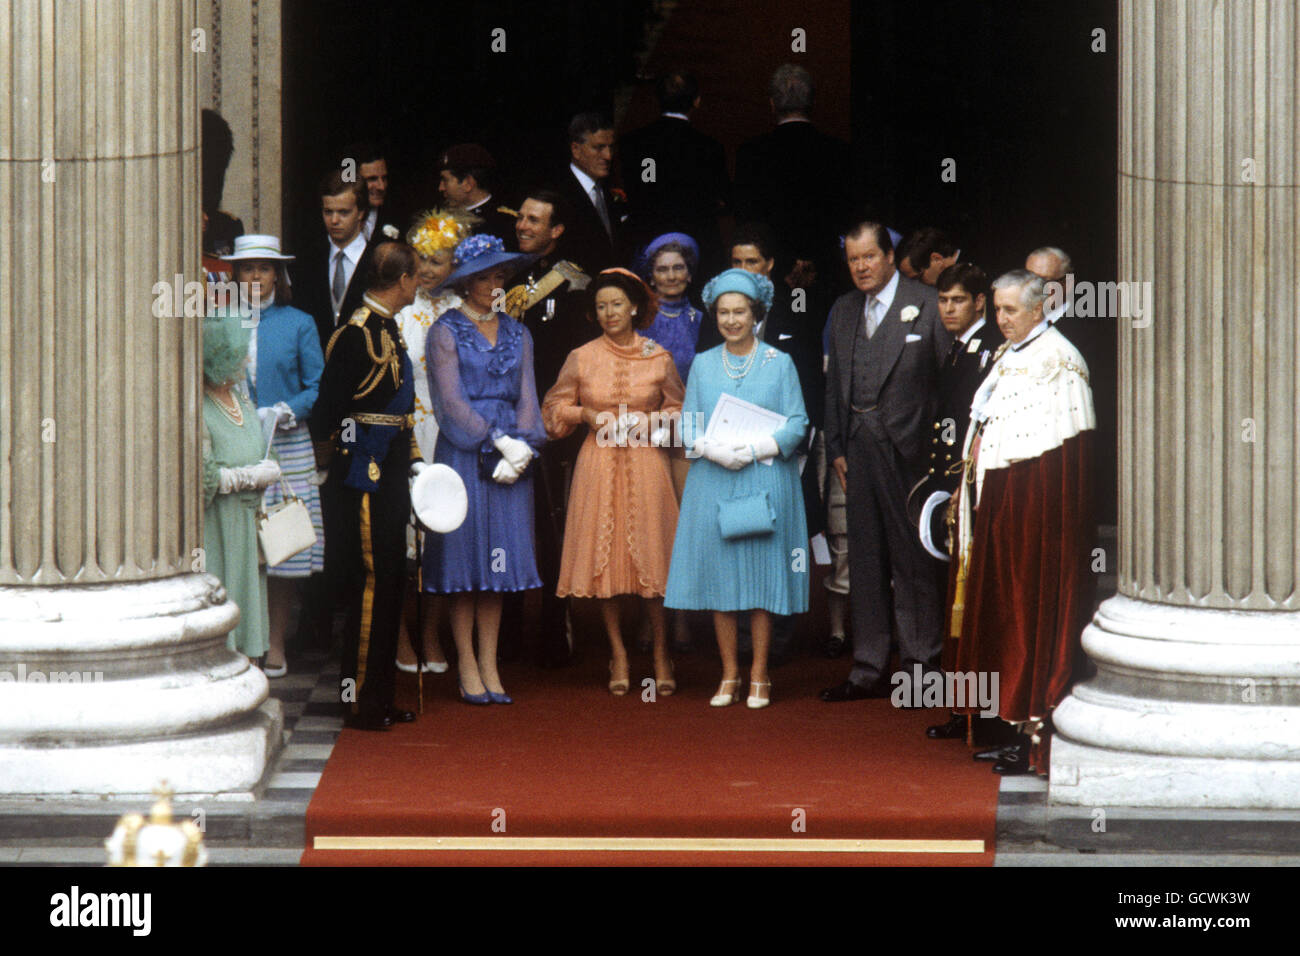 Part of the Royal Family, including the Queen, Princess Margaret (wearing orange), Earl Spencer, the Duke of Edinburgh and Prince Andrew, on the steps of St Paul's Cathedral after the wedding of Prince of Wales and Lady Diana Spencer. Stock Photo